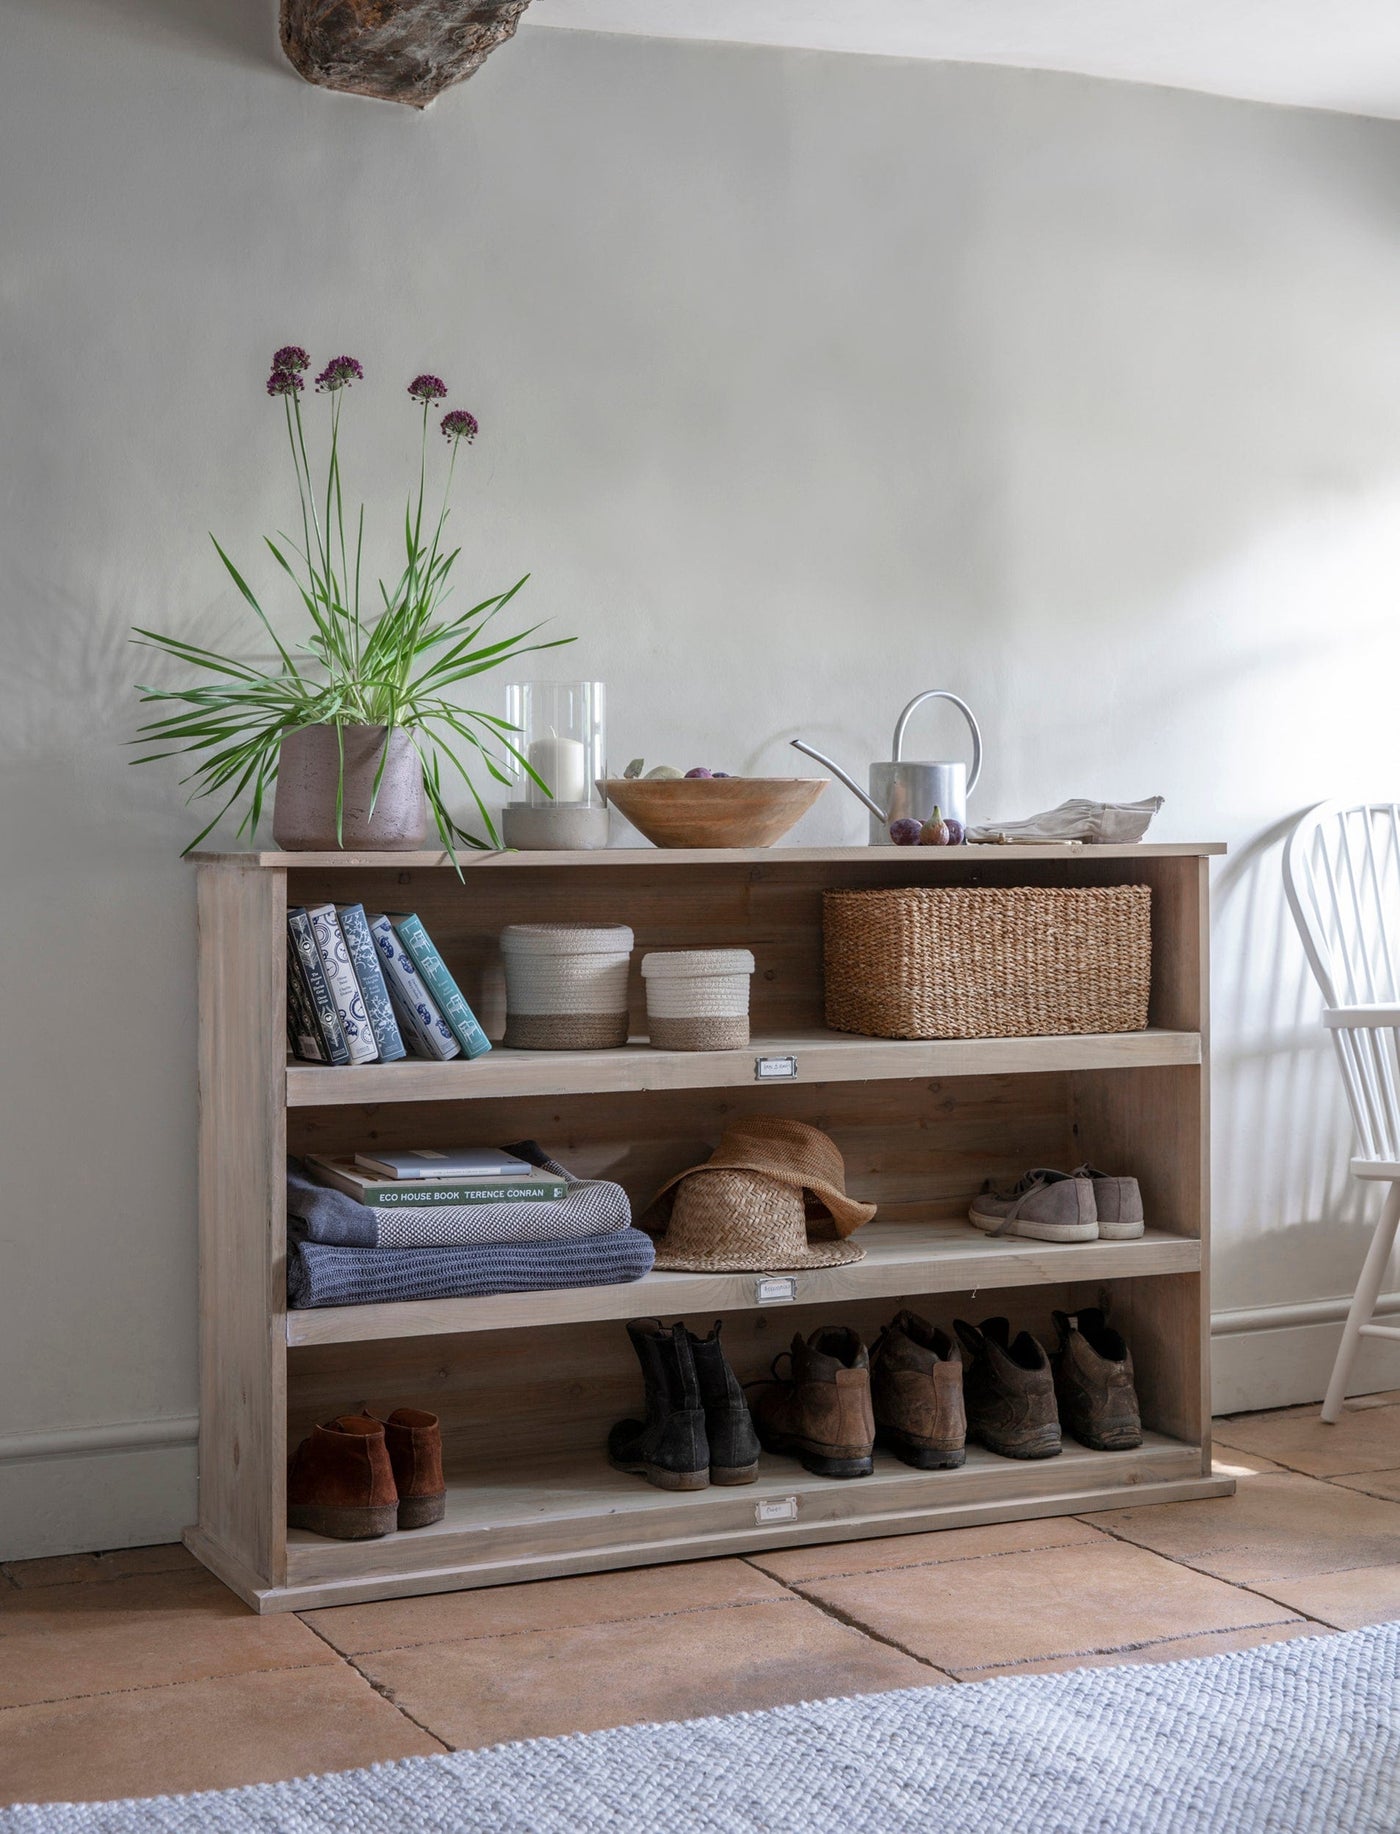 Garden Trading Living Chedworth Shelving in Spruce House of Isabella UK